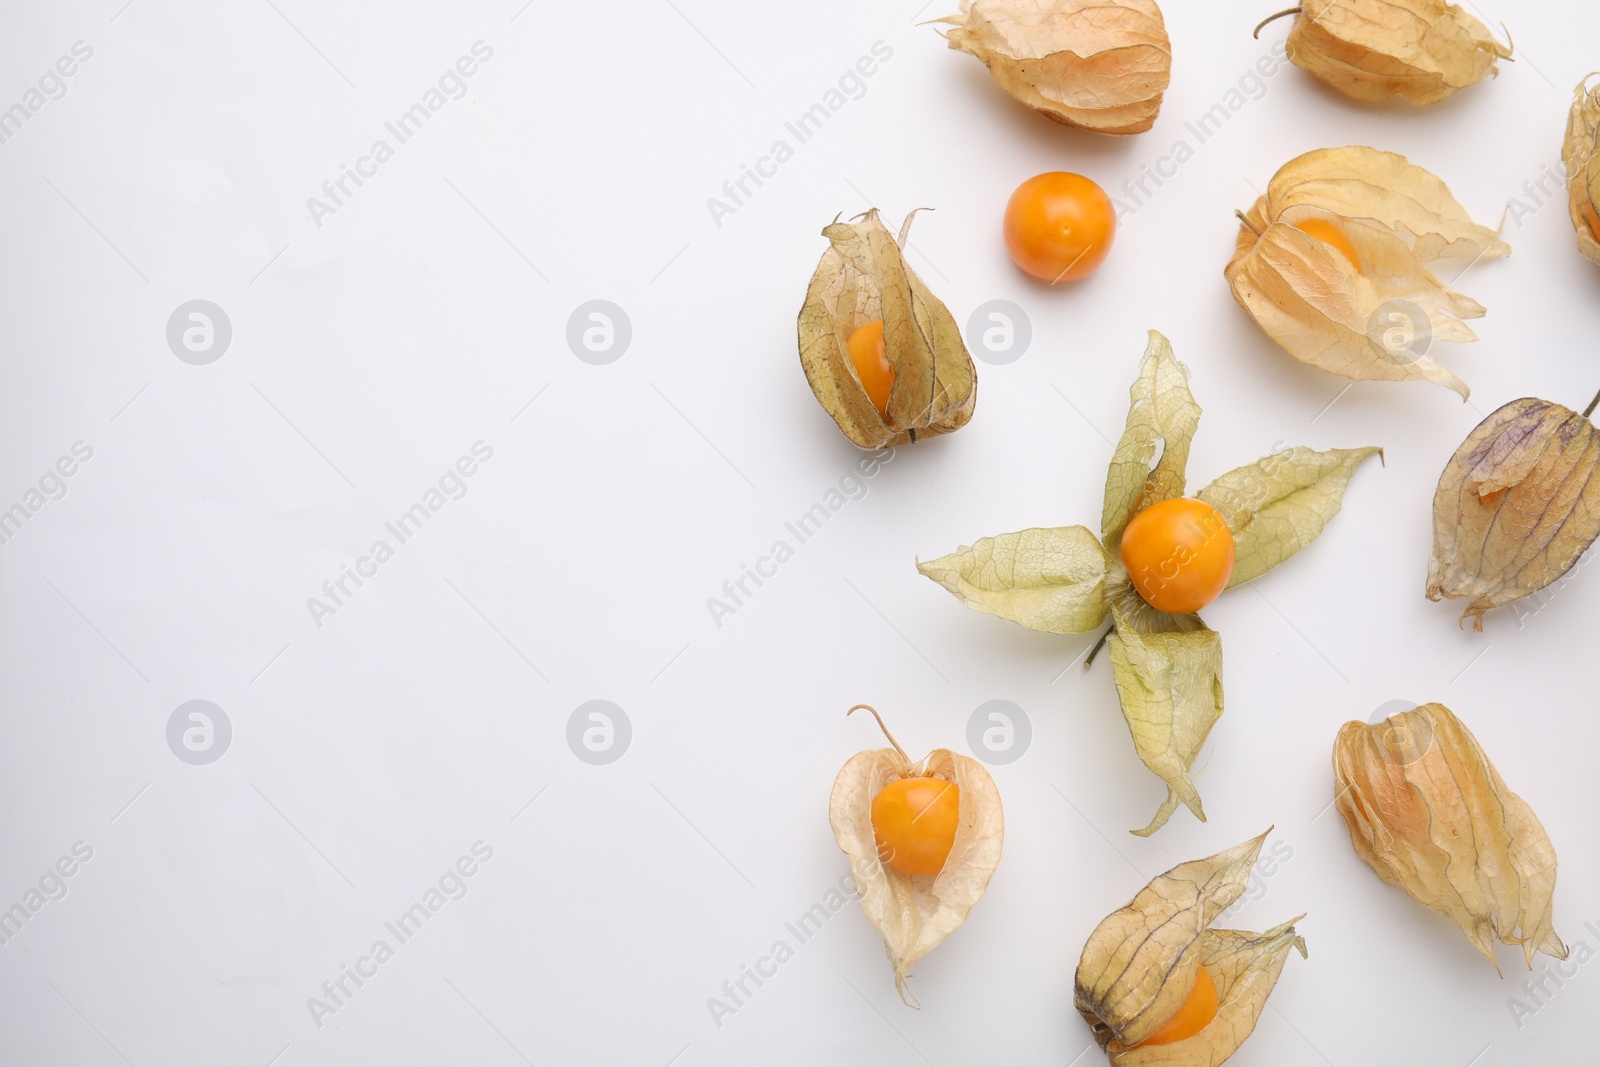 Photo of Ripe physalis fruits with calyxes on white background, flat lay. Space for text